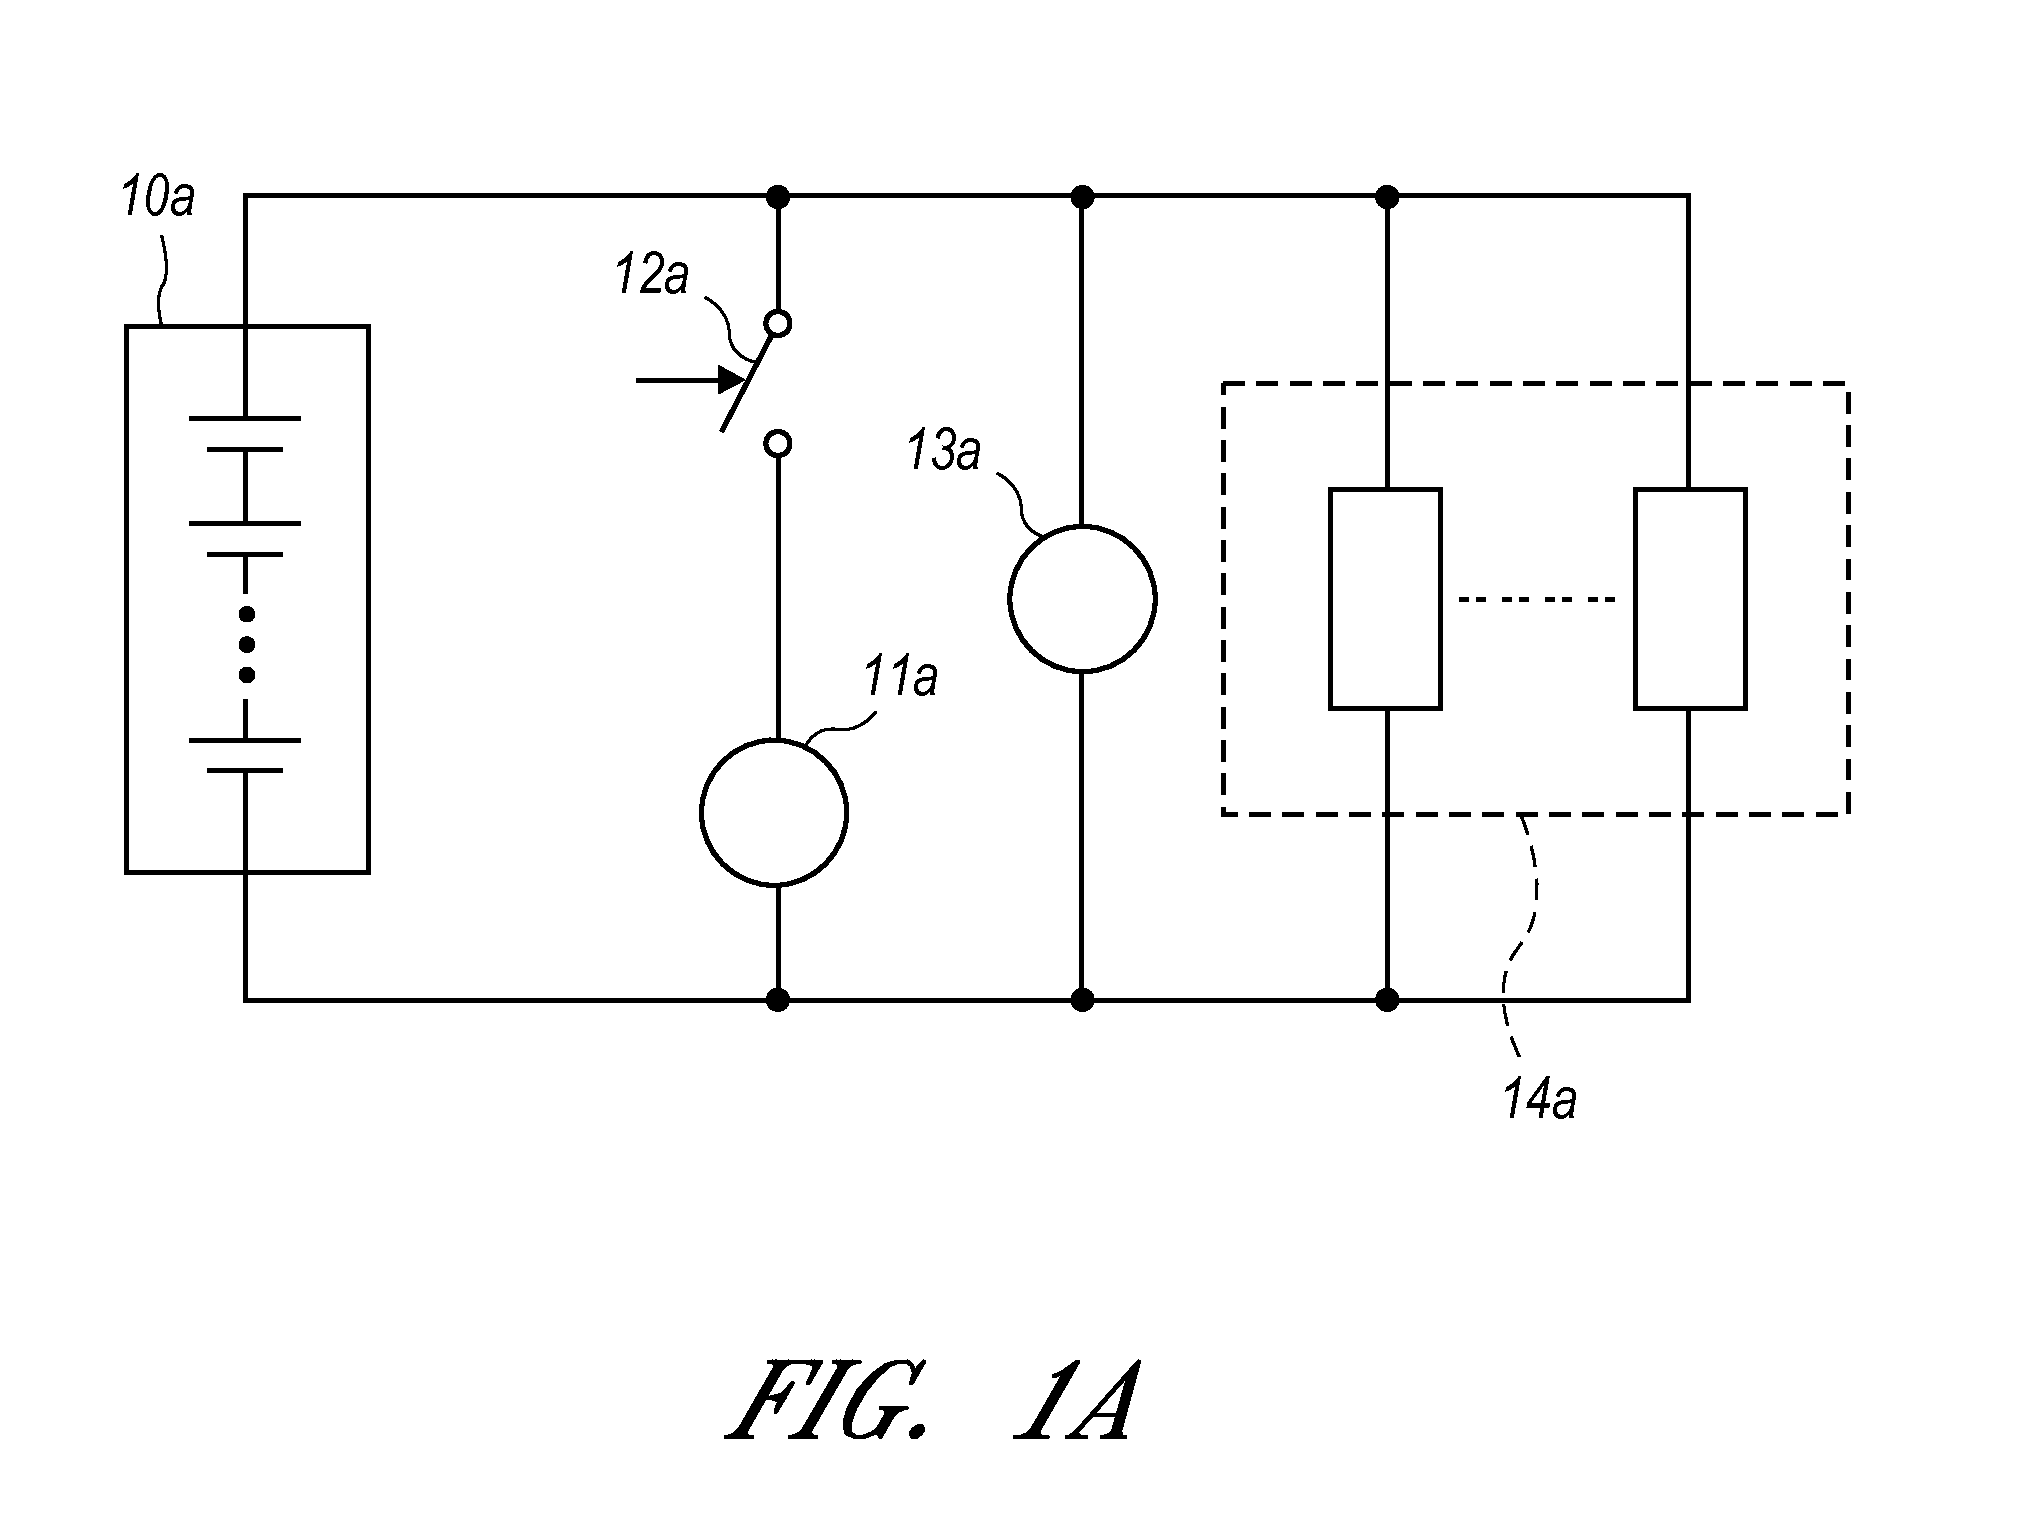 Temperature control systems with thermoelectric devices